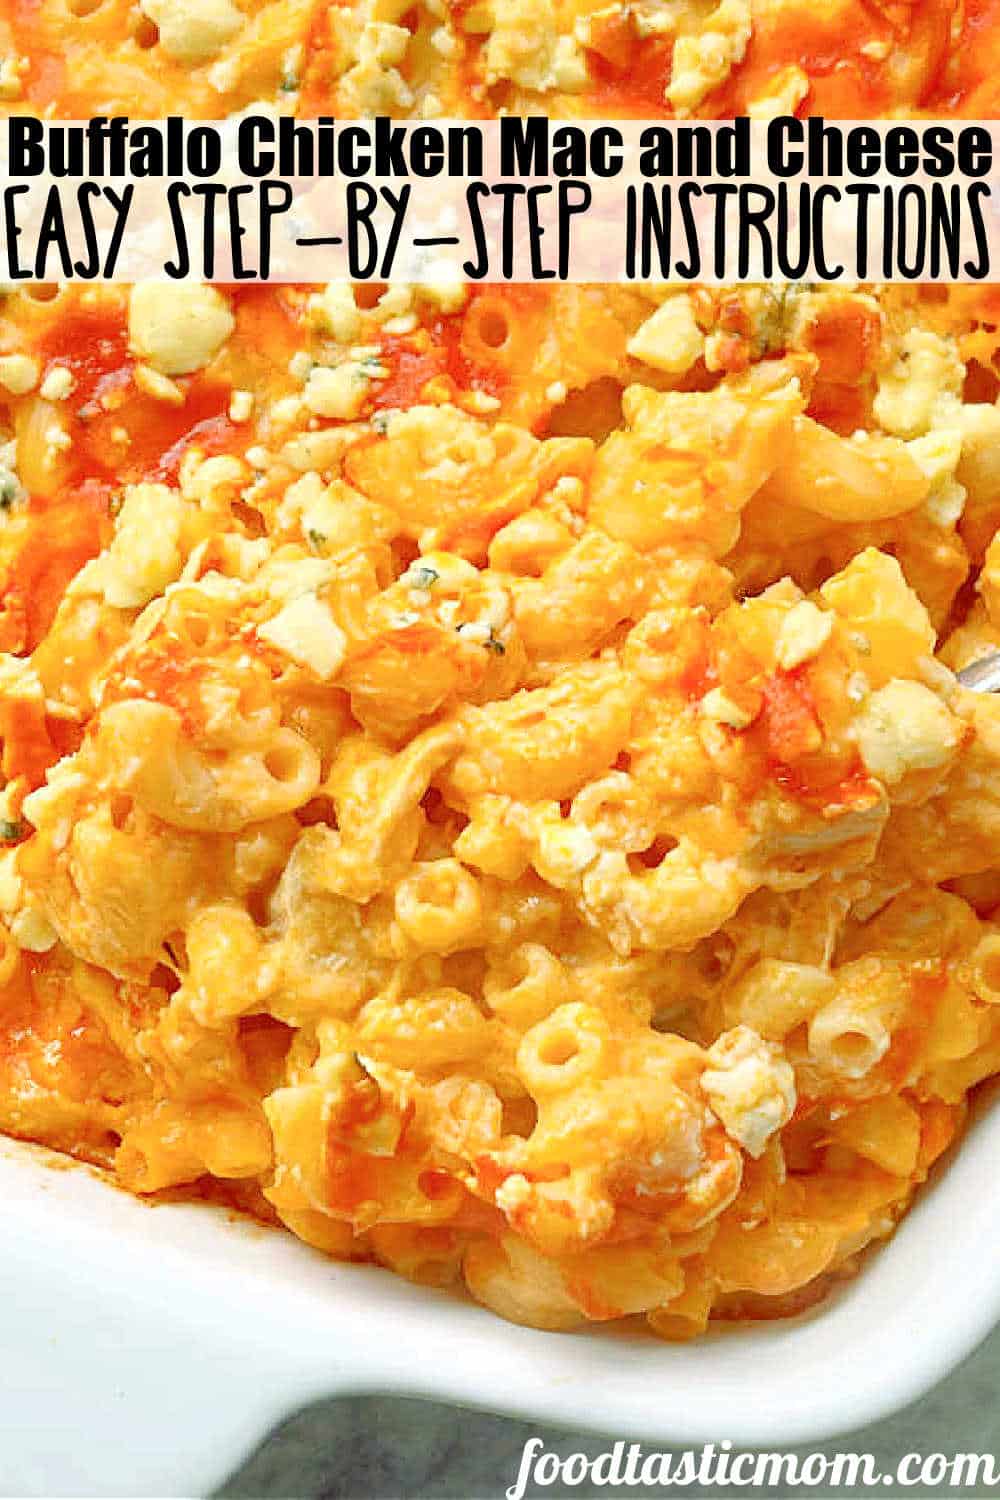 Here it is - the best, creamy, zesty, full of flavor recipe for Buffalo Chicken Mac and Cheese - perfect for entertaining and tailgating.